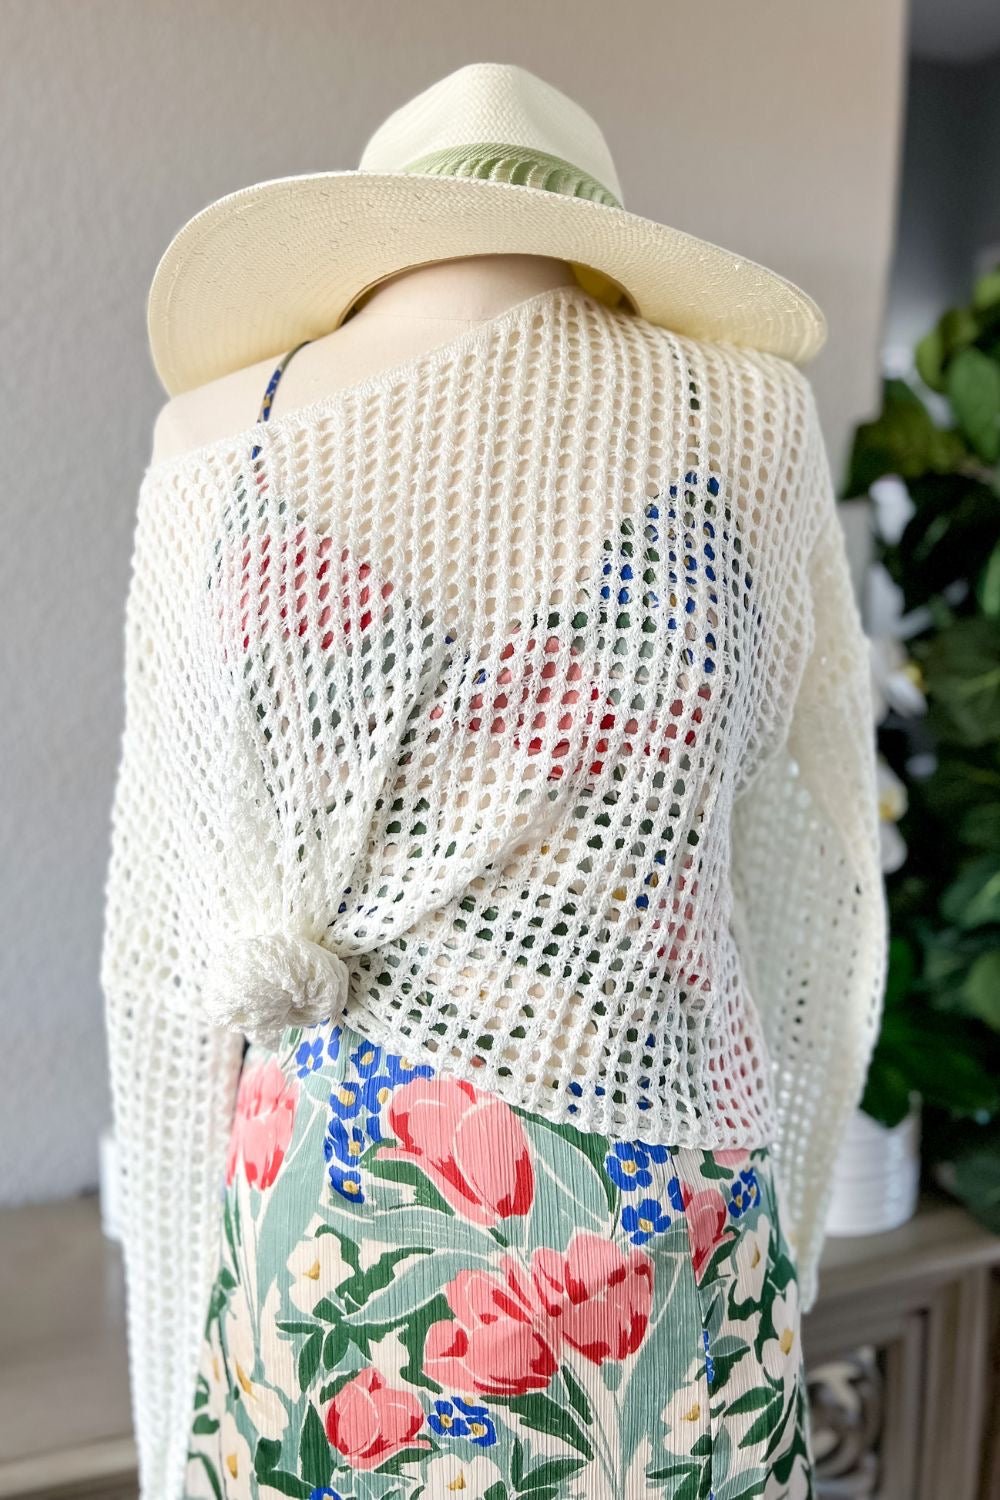 Sage The Label | Boho Crochet Long Sleeve Top | Ivory - Women&#39;s Shirts &amp; Tops - Blooming Daily